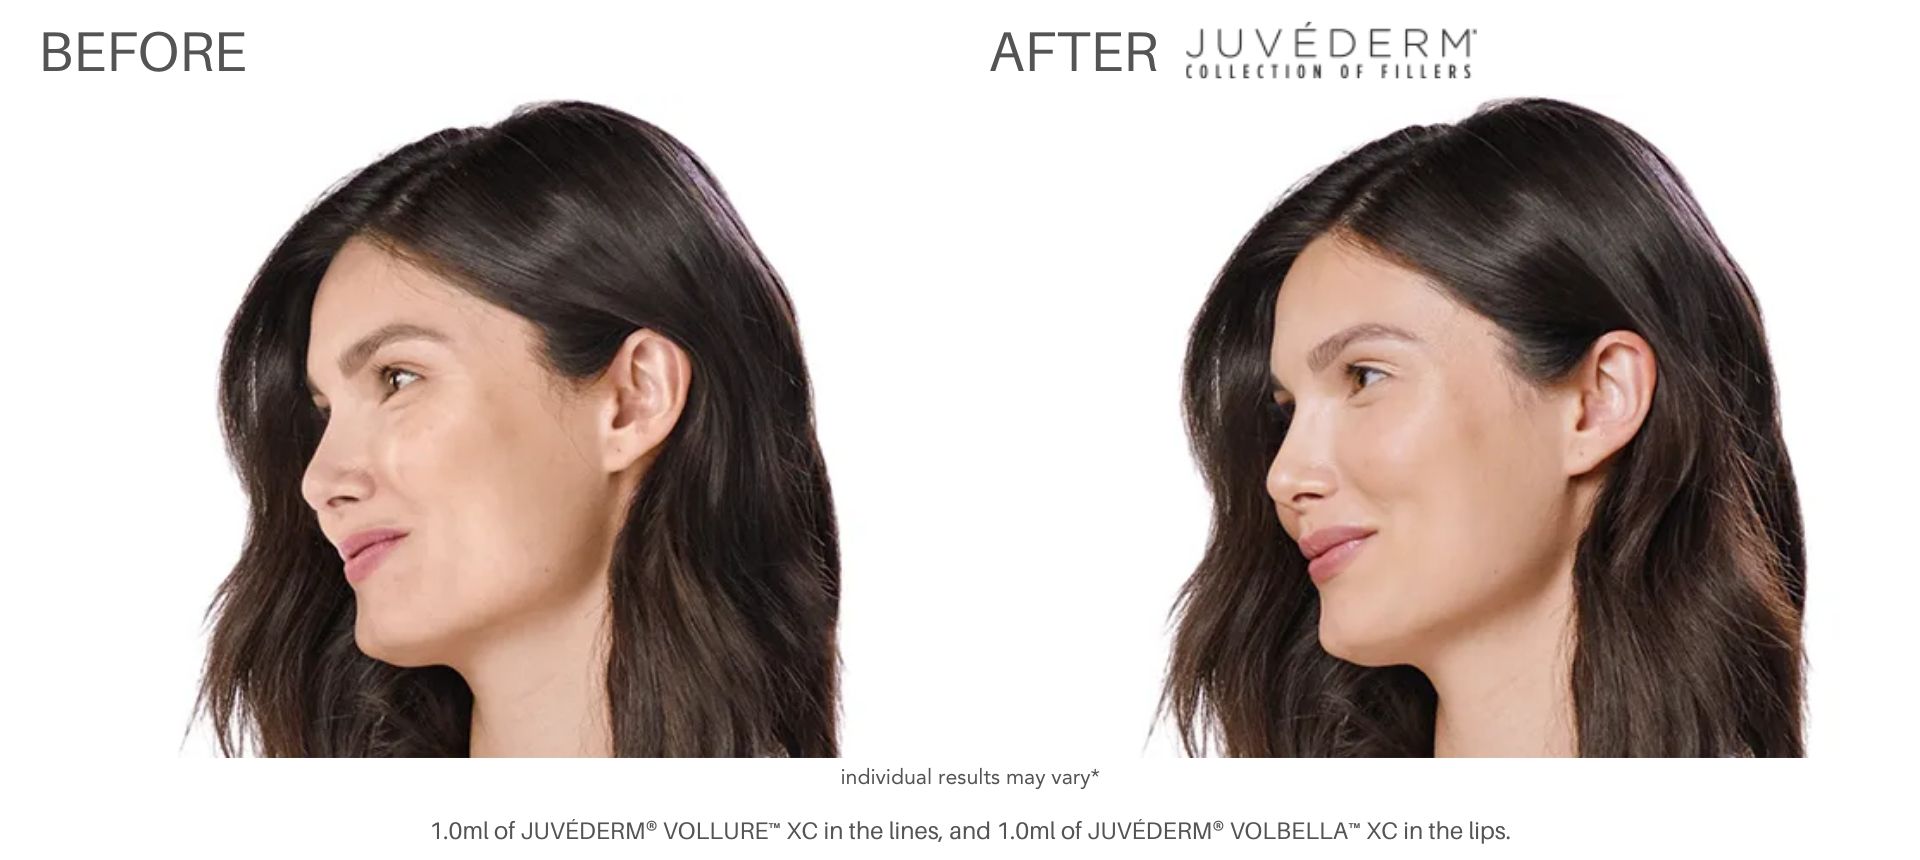 Woman's Juvéderm fillers before and after results at Laser + Skin Institute in Chatham, NJ.